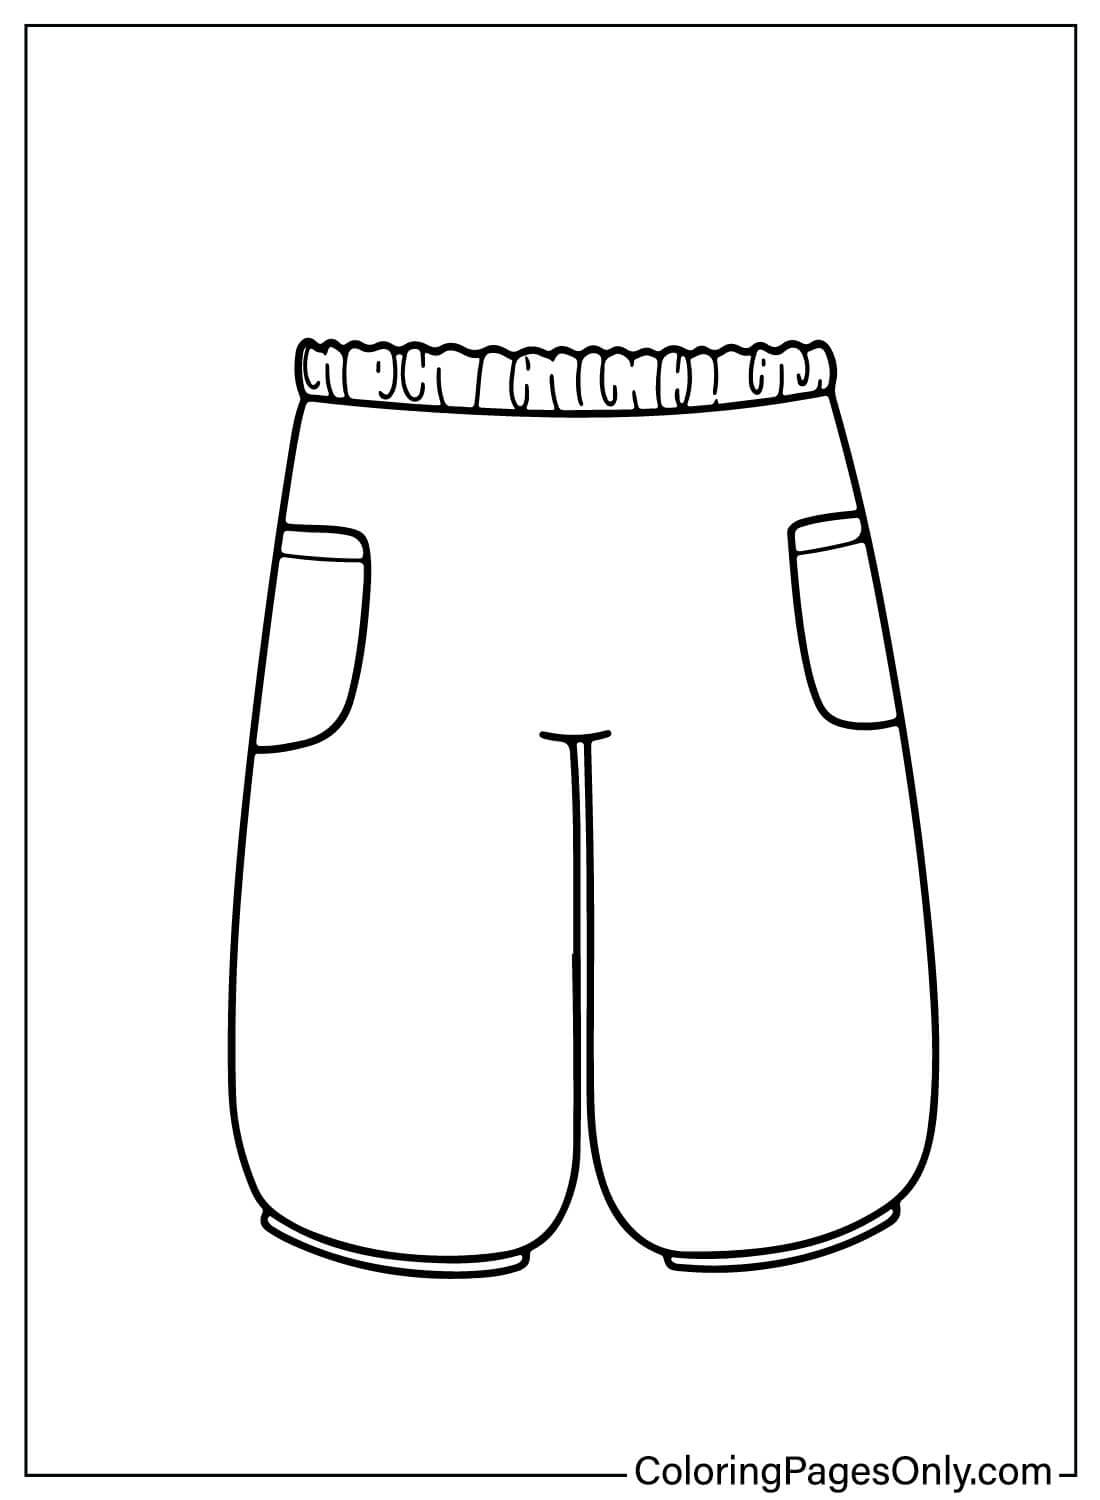 Baby Clothes Coloring Pages - Free Printable Coloring Pages